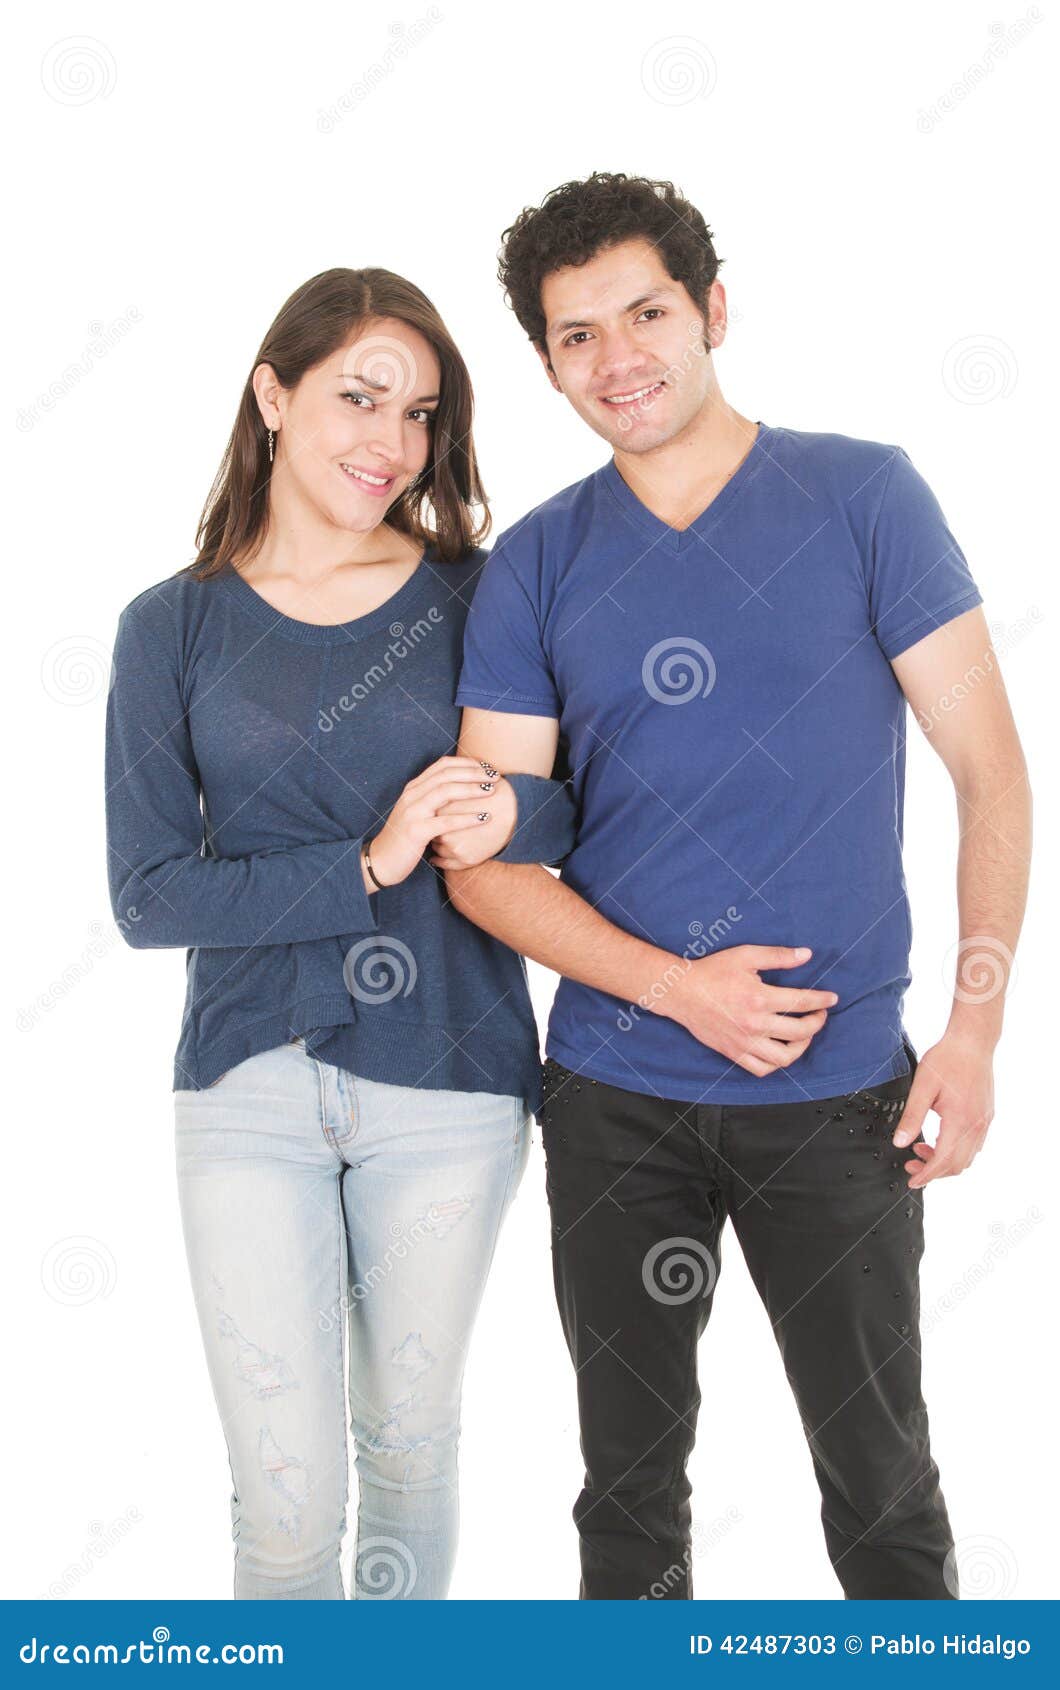 https://thumbs.dreamstime.com/z/cute-latin-couple-dressed-blue-holding-arms-together-isolated-over-white-42487303.jpg